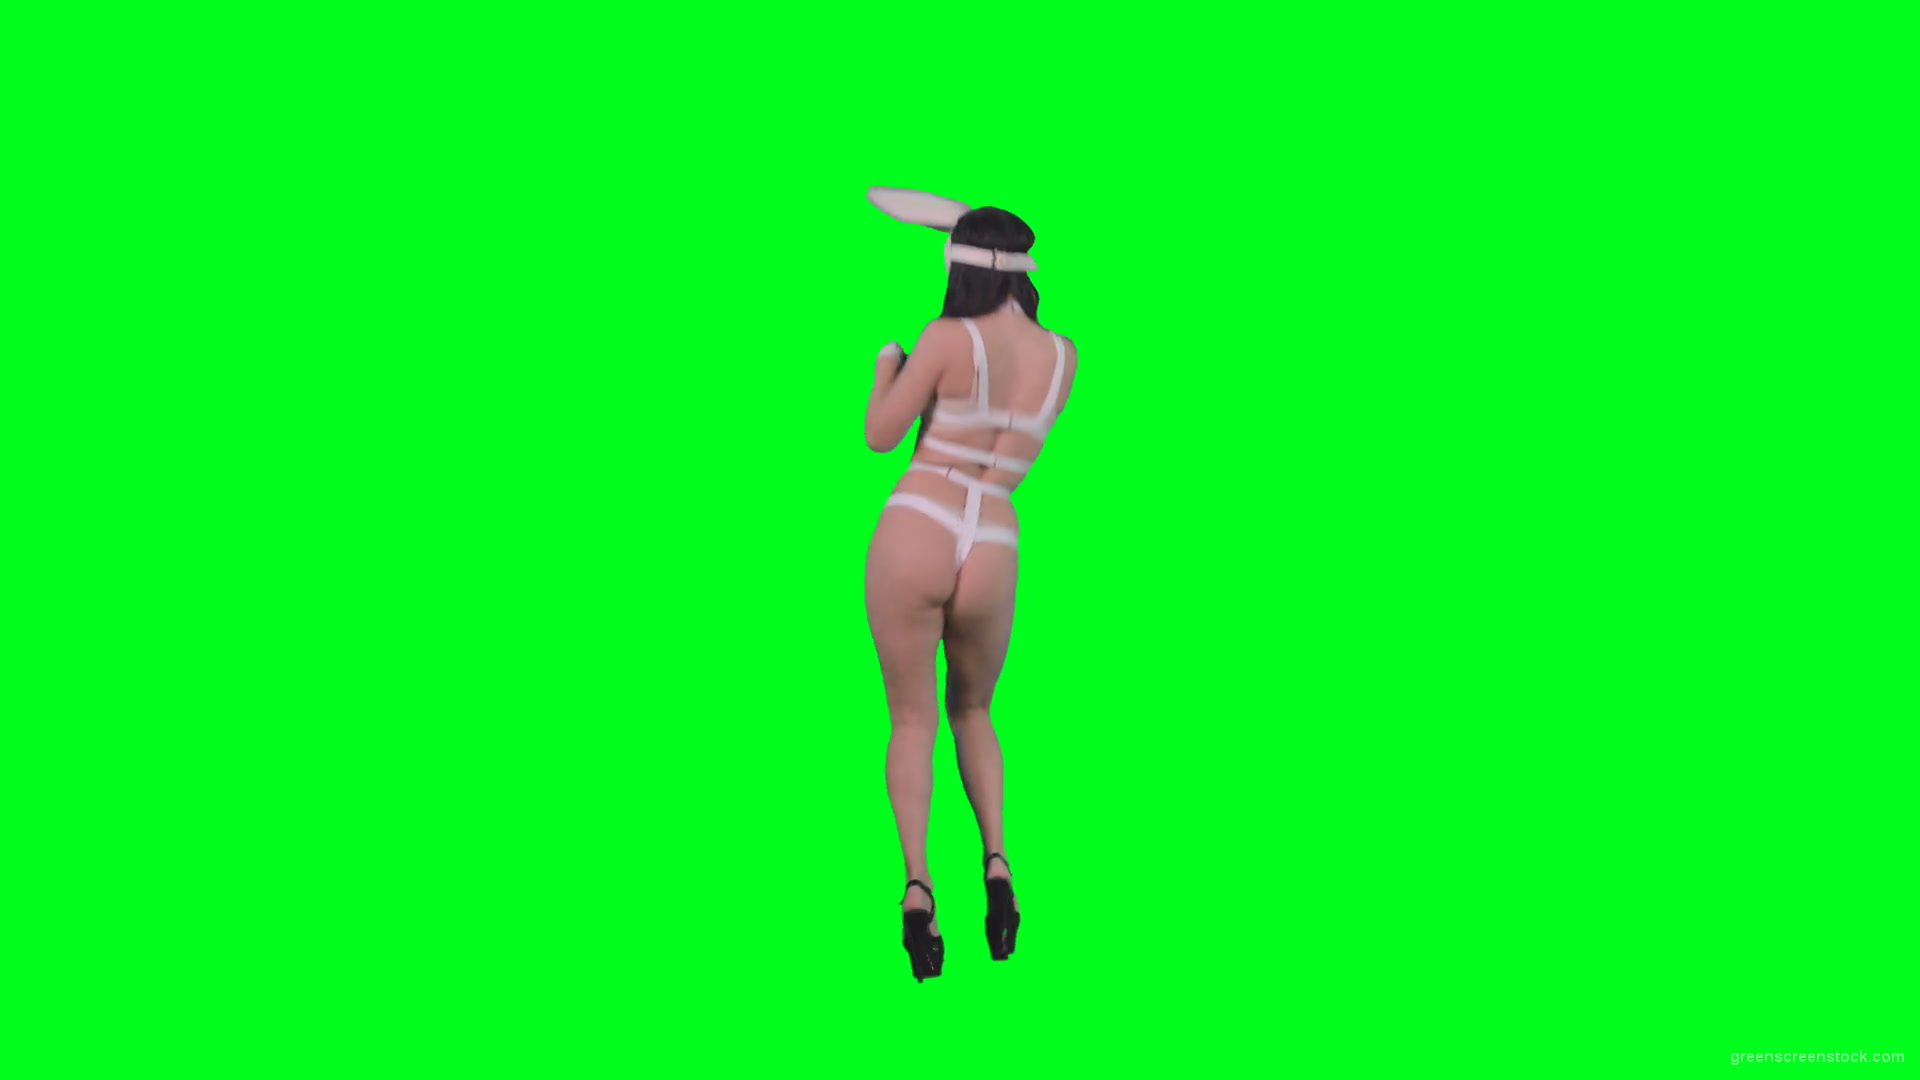 Young-girl-in-rabbit-costume-jumping-and-spinning-on-green-screen-4K-Video-Footage-1920_002 Green Screen Stock